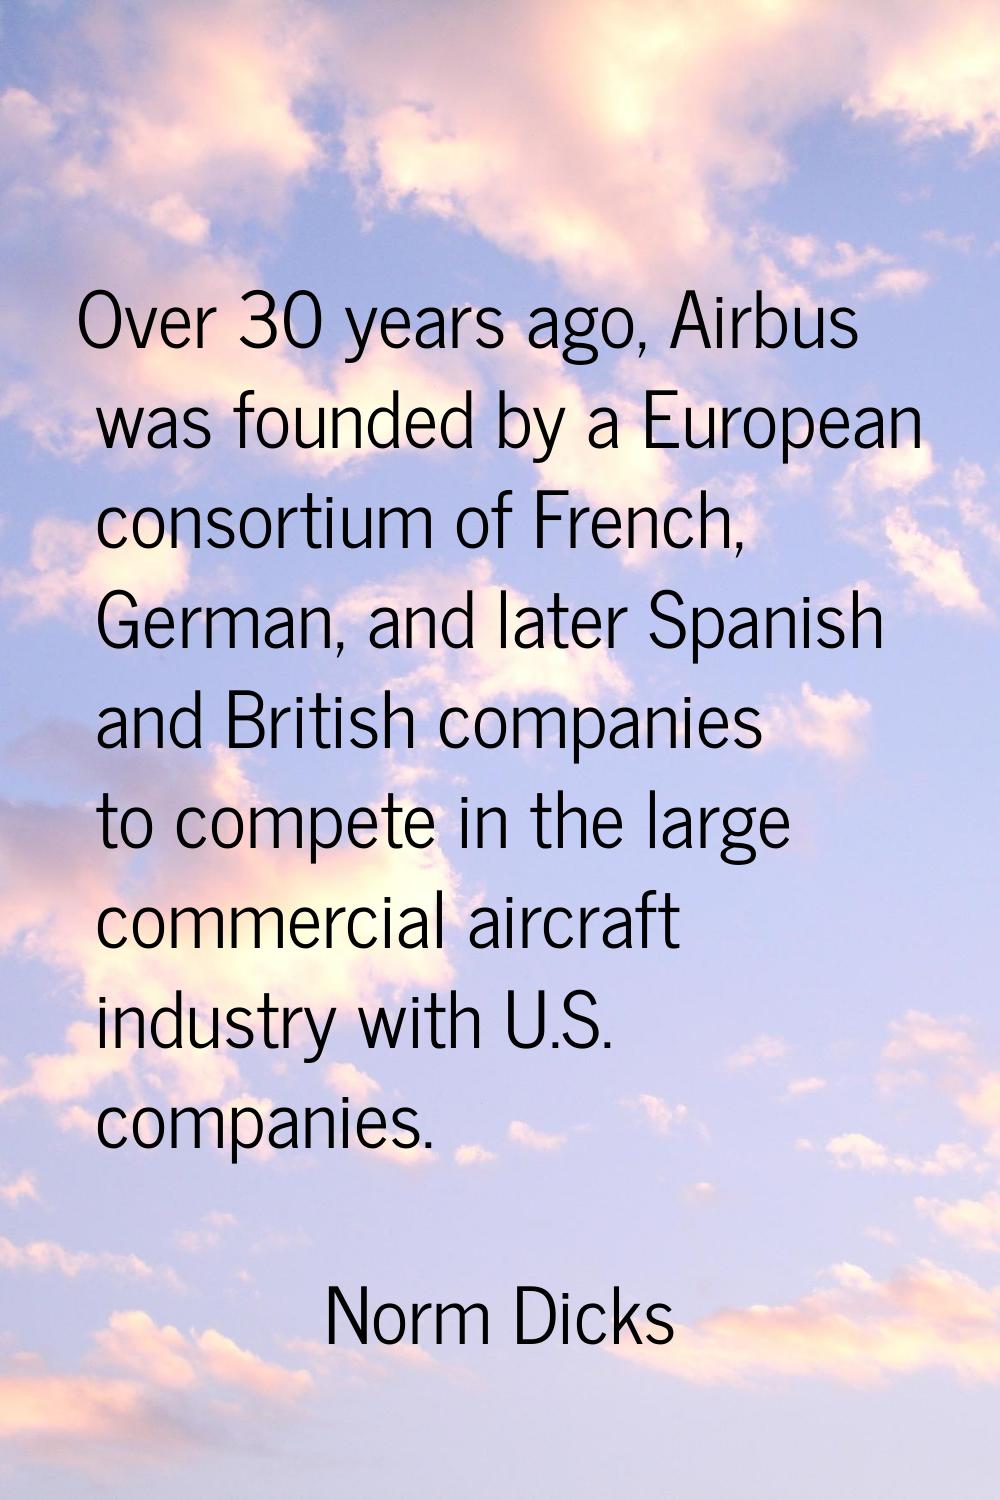 Over 30 years ago, Airbus was founded by a European consortium of French, German, and later Spanish